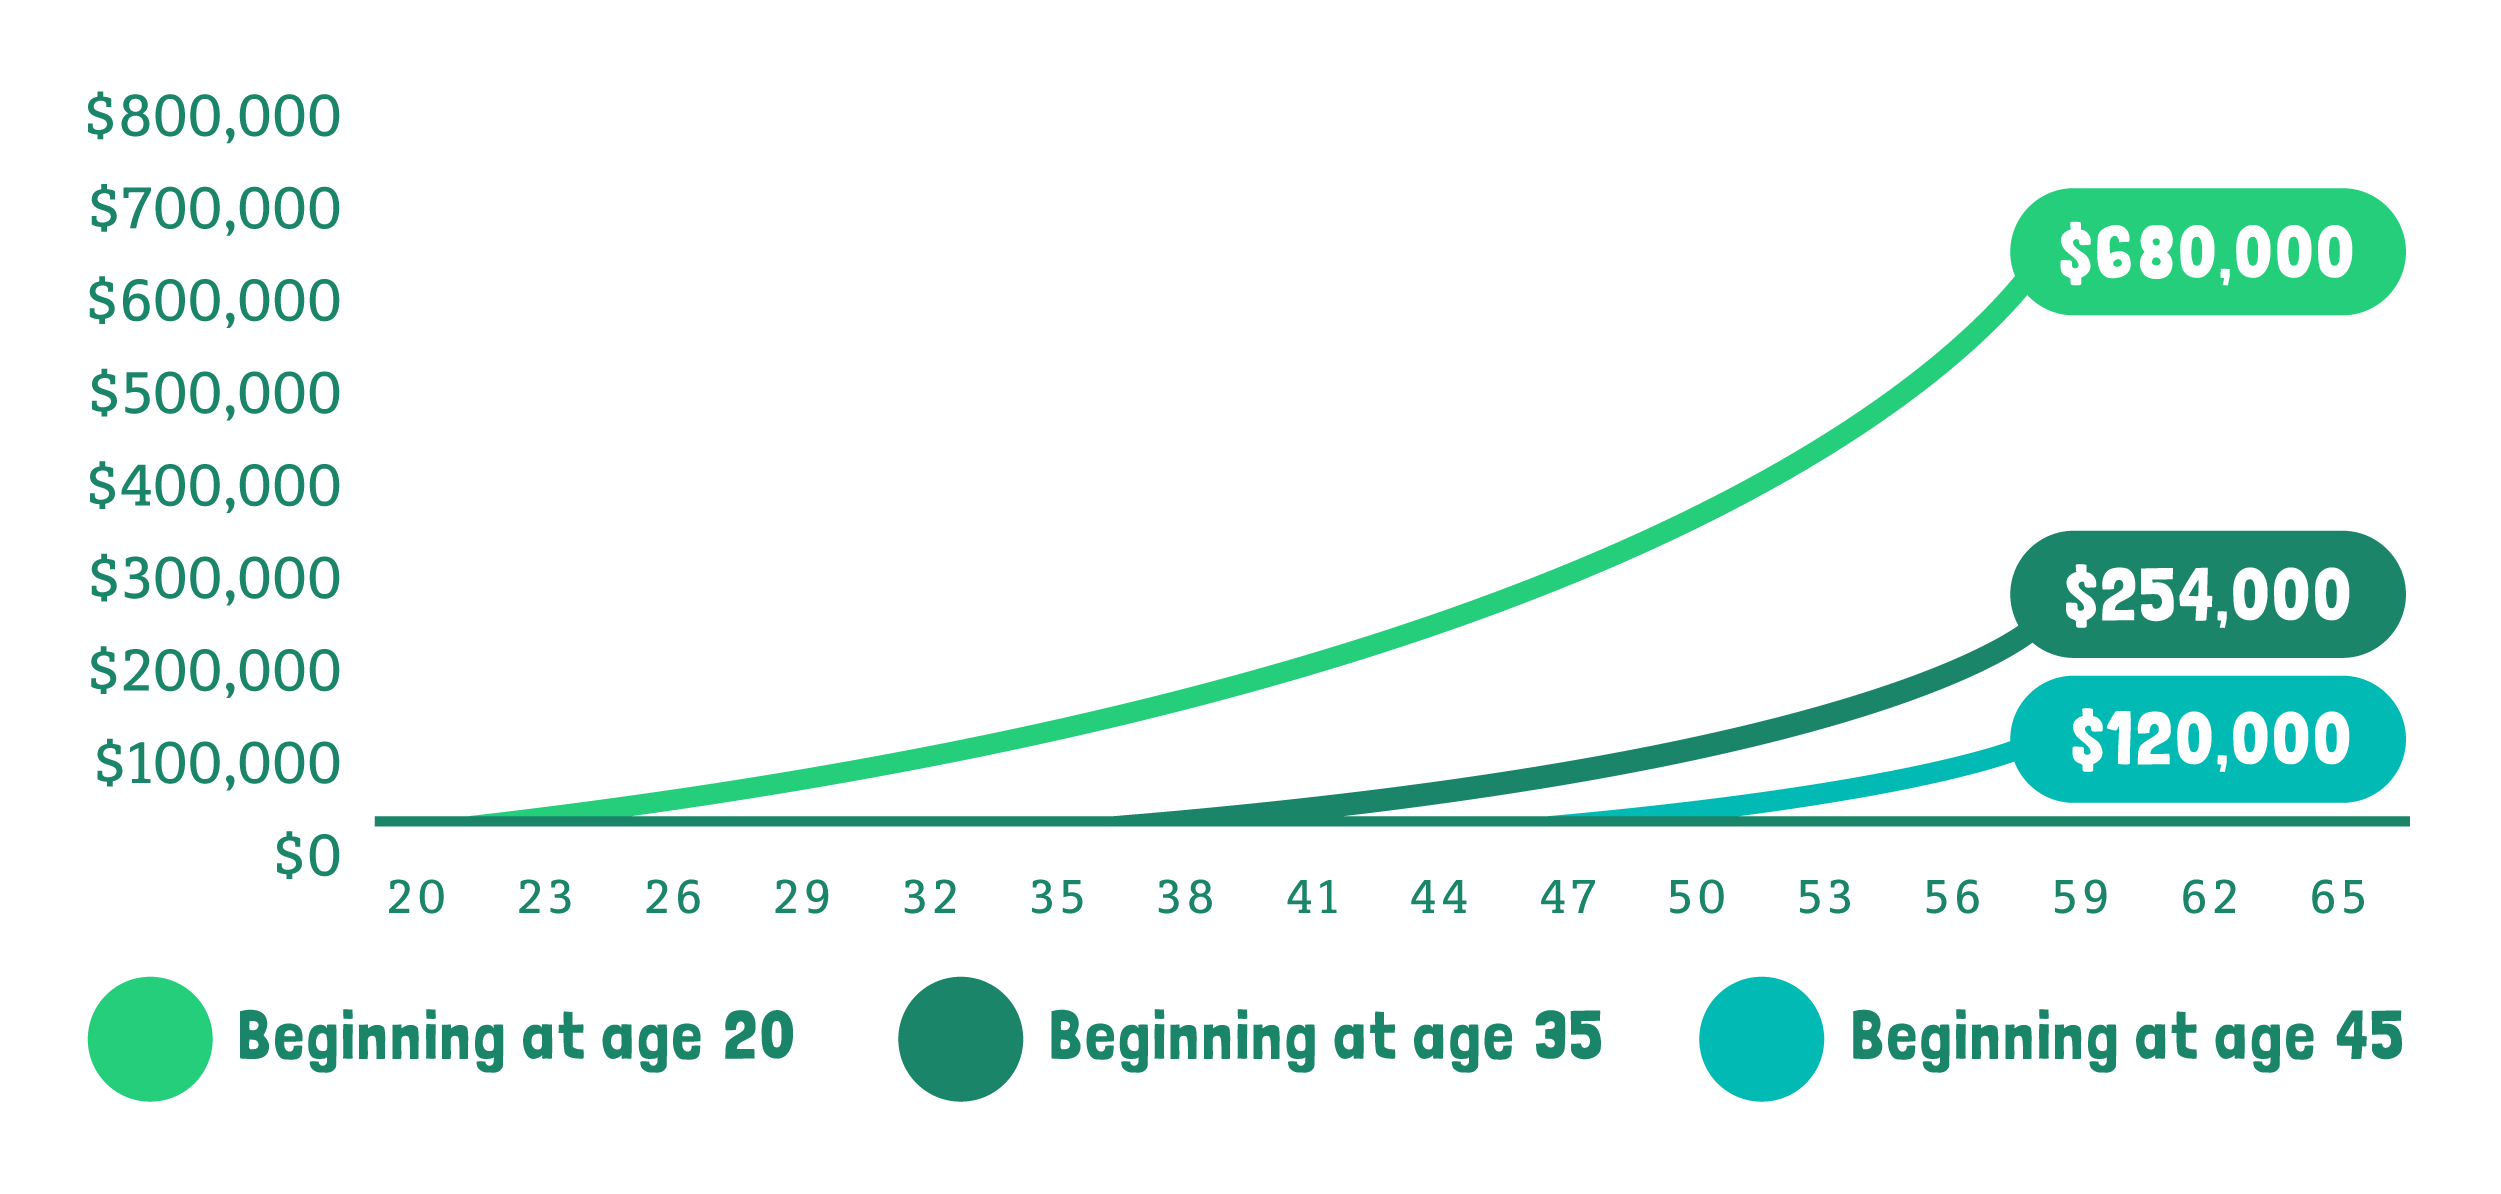 Graph depicting the growth of a $3,000 per year investment at retirement age beginning at age 20, age 35 and age 45, assuming a 6% annual compounding interest rate. 